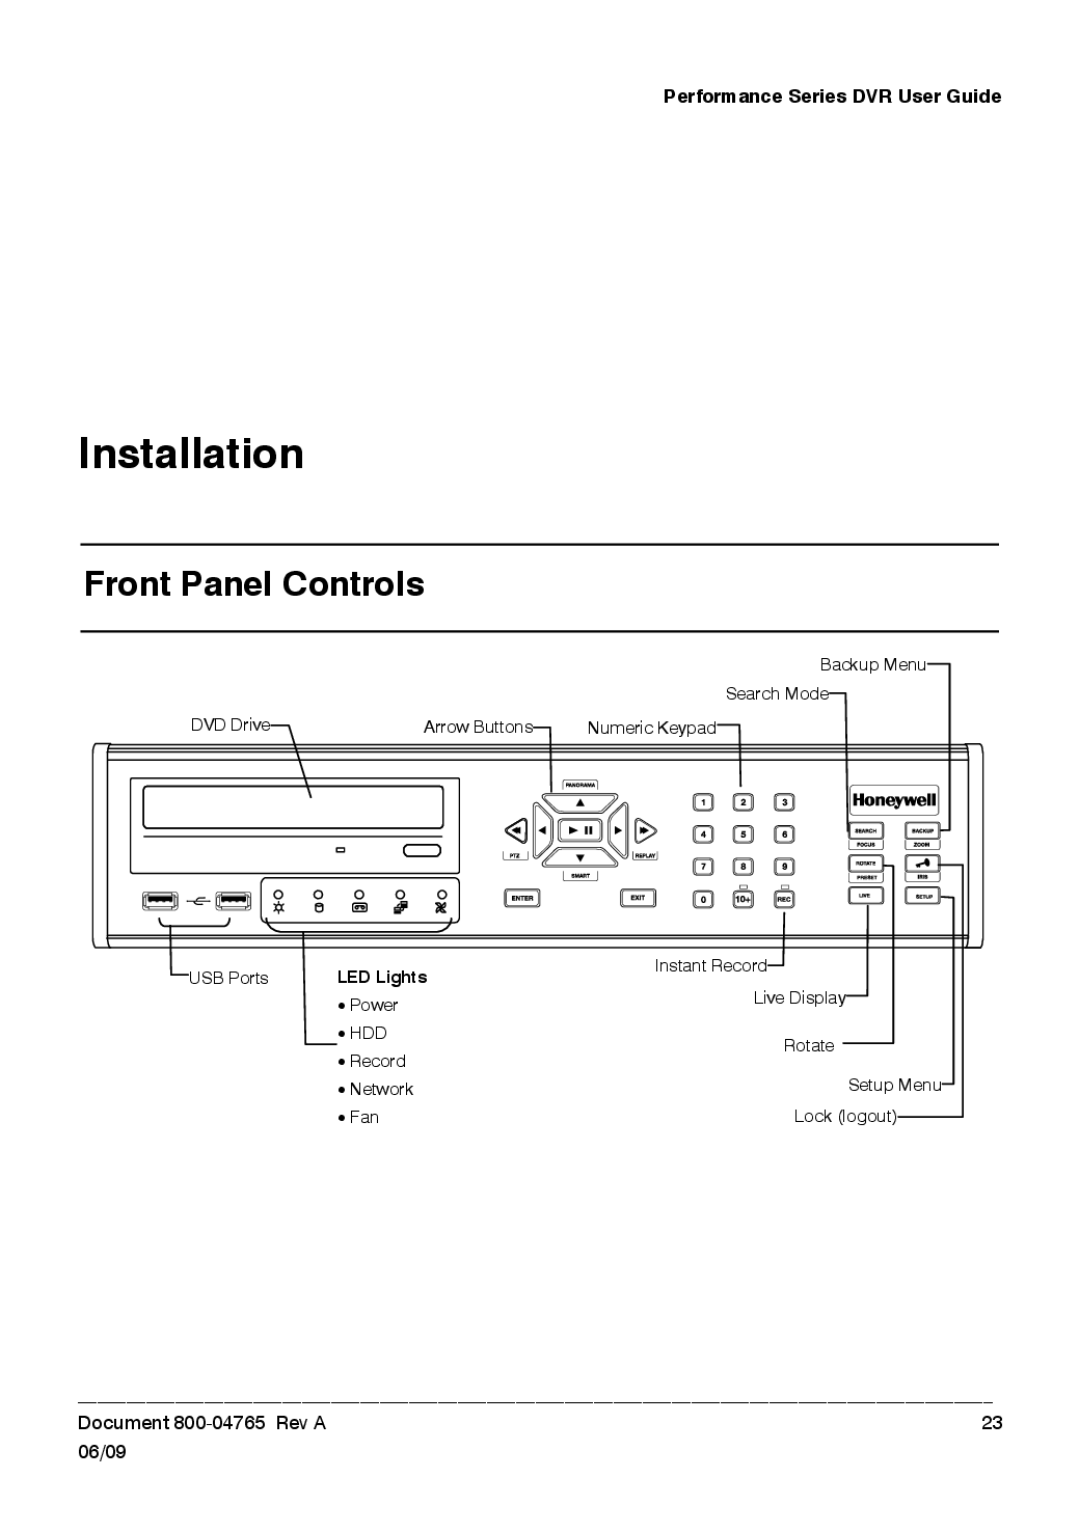 Honeywell HRDPX manual Installation, Front Panel Controls 